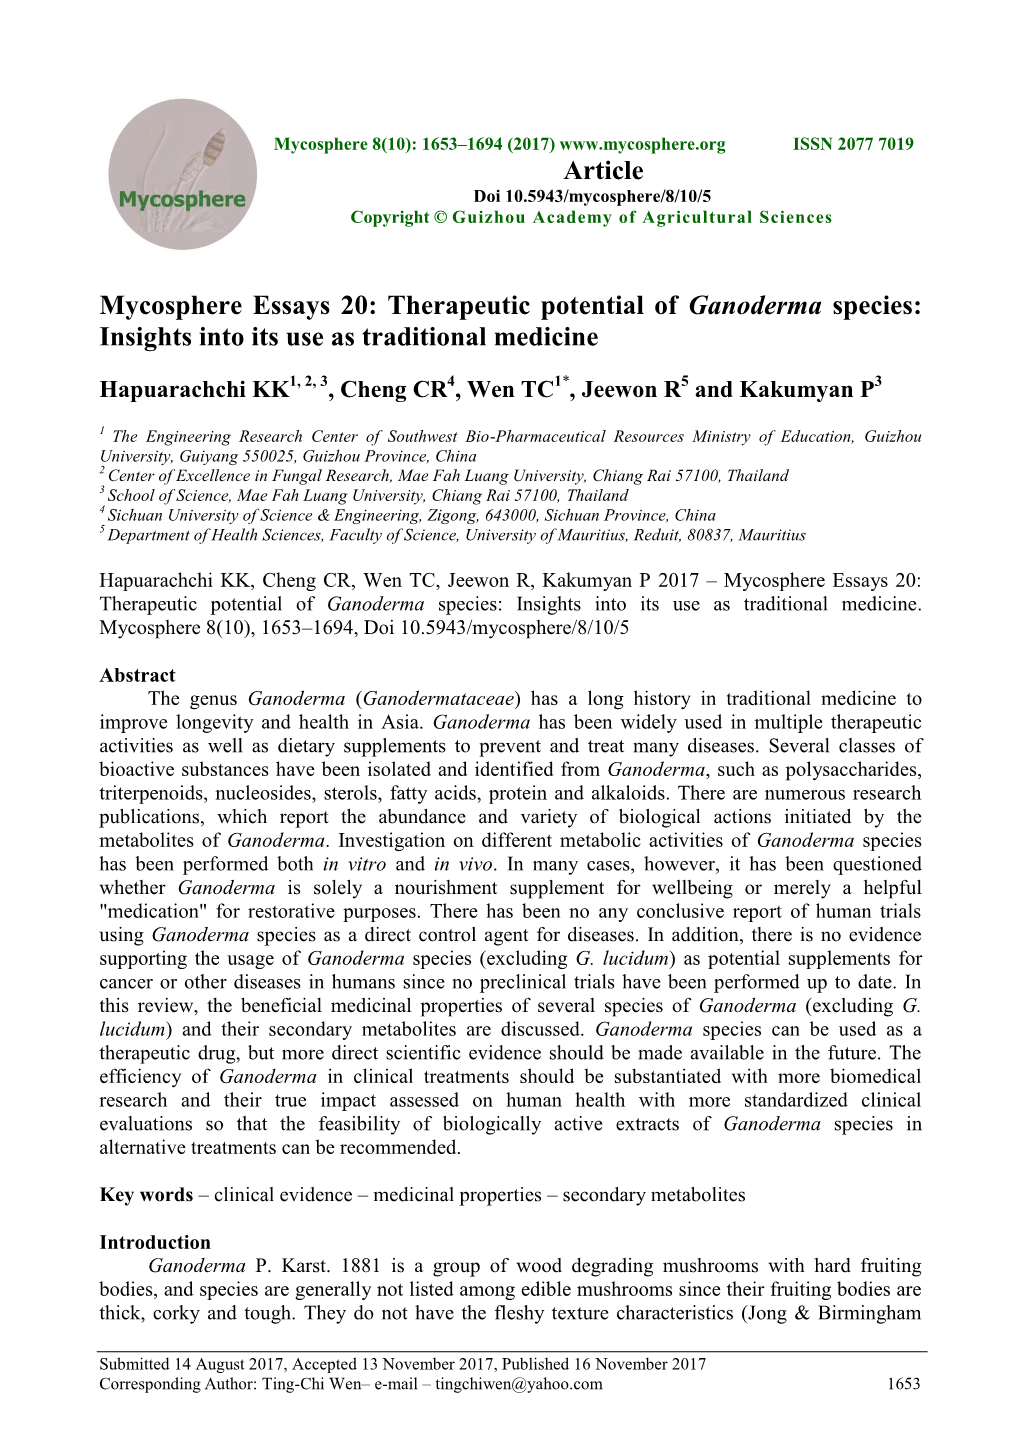 Mycosphere Essays 20: Therapeutic Potential of Ganoderma Species: Insights Into Its Use As Traditional Medicine Article